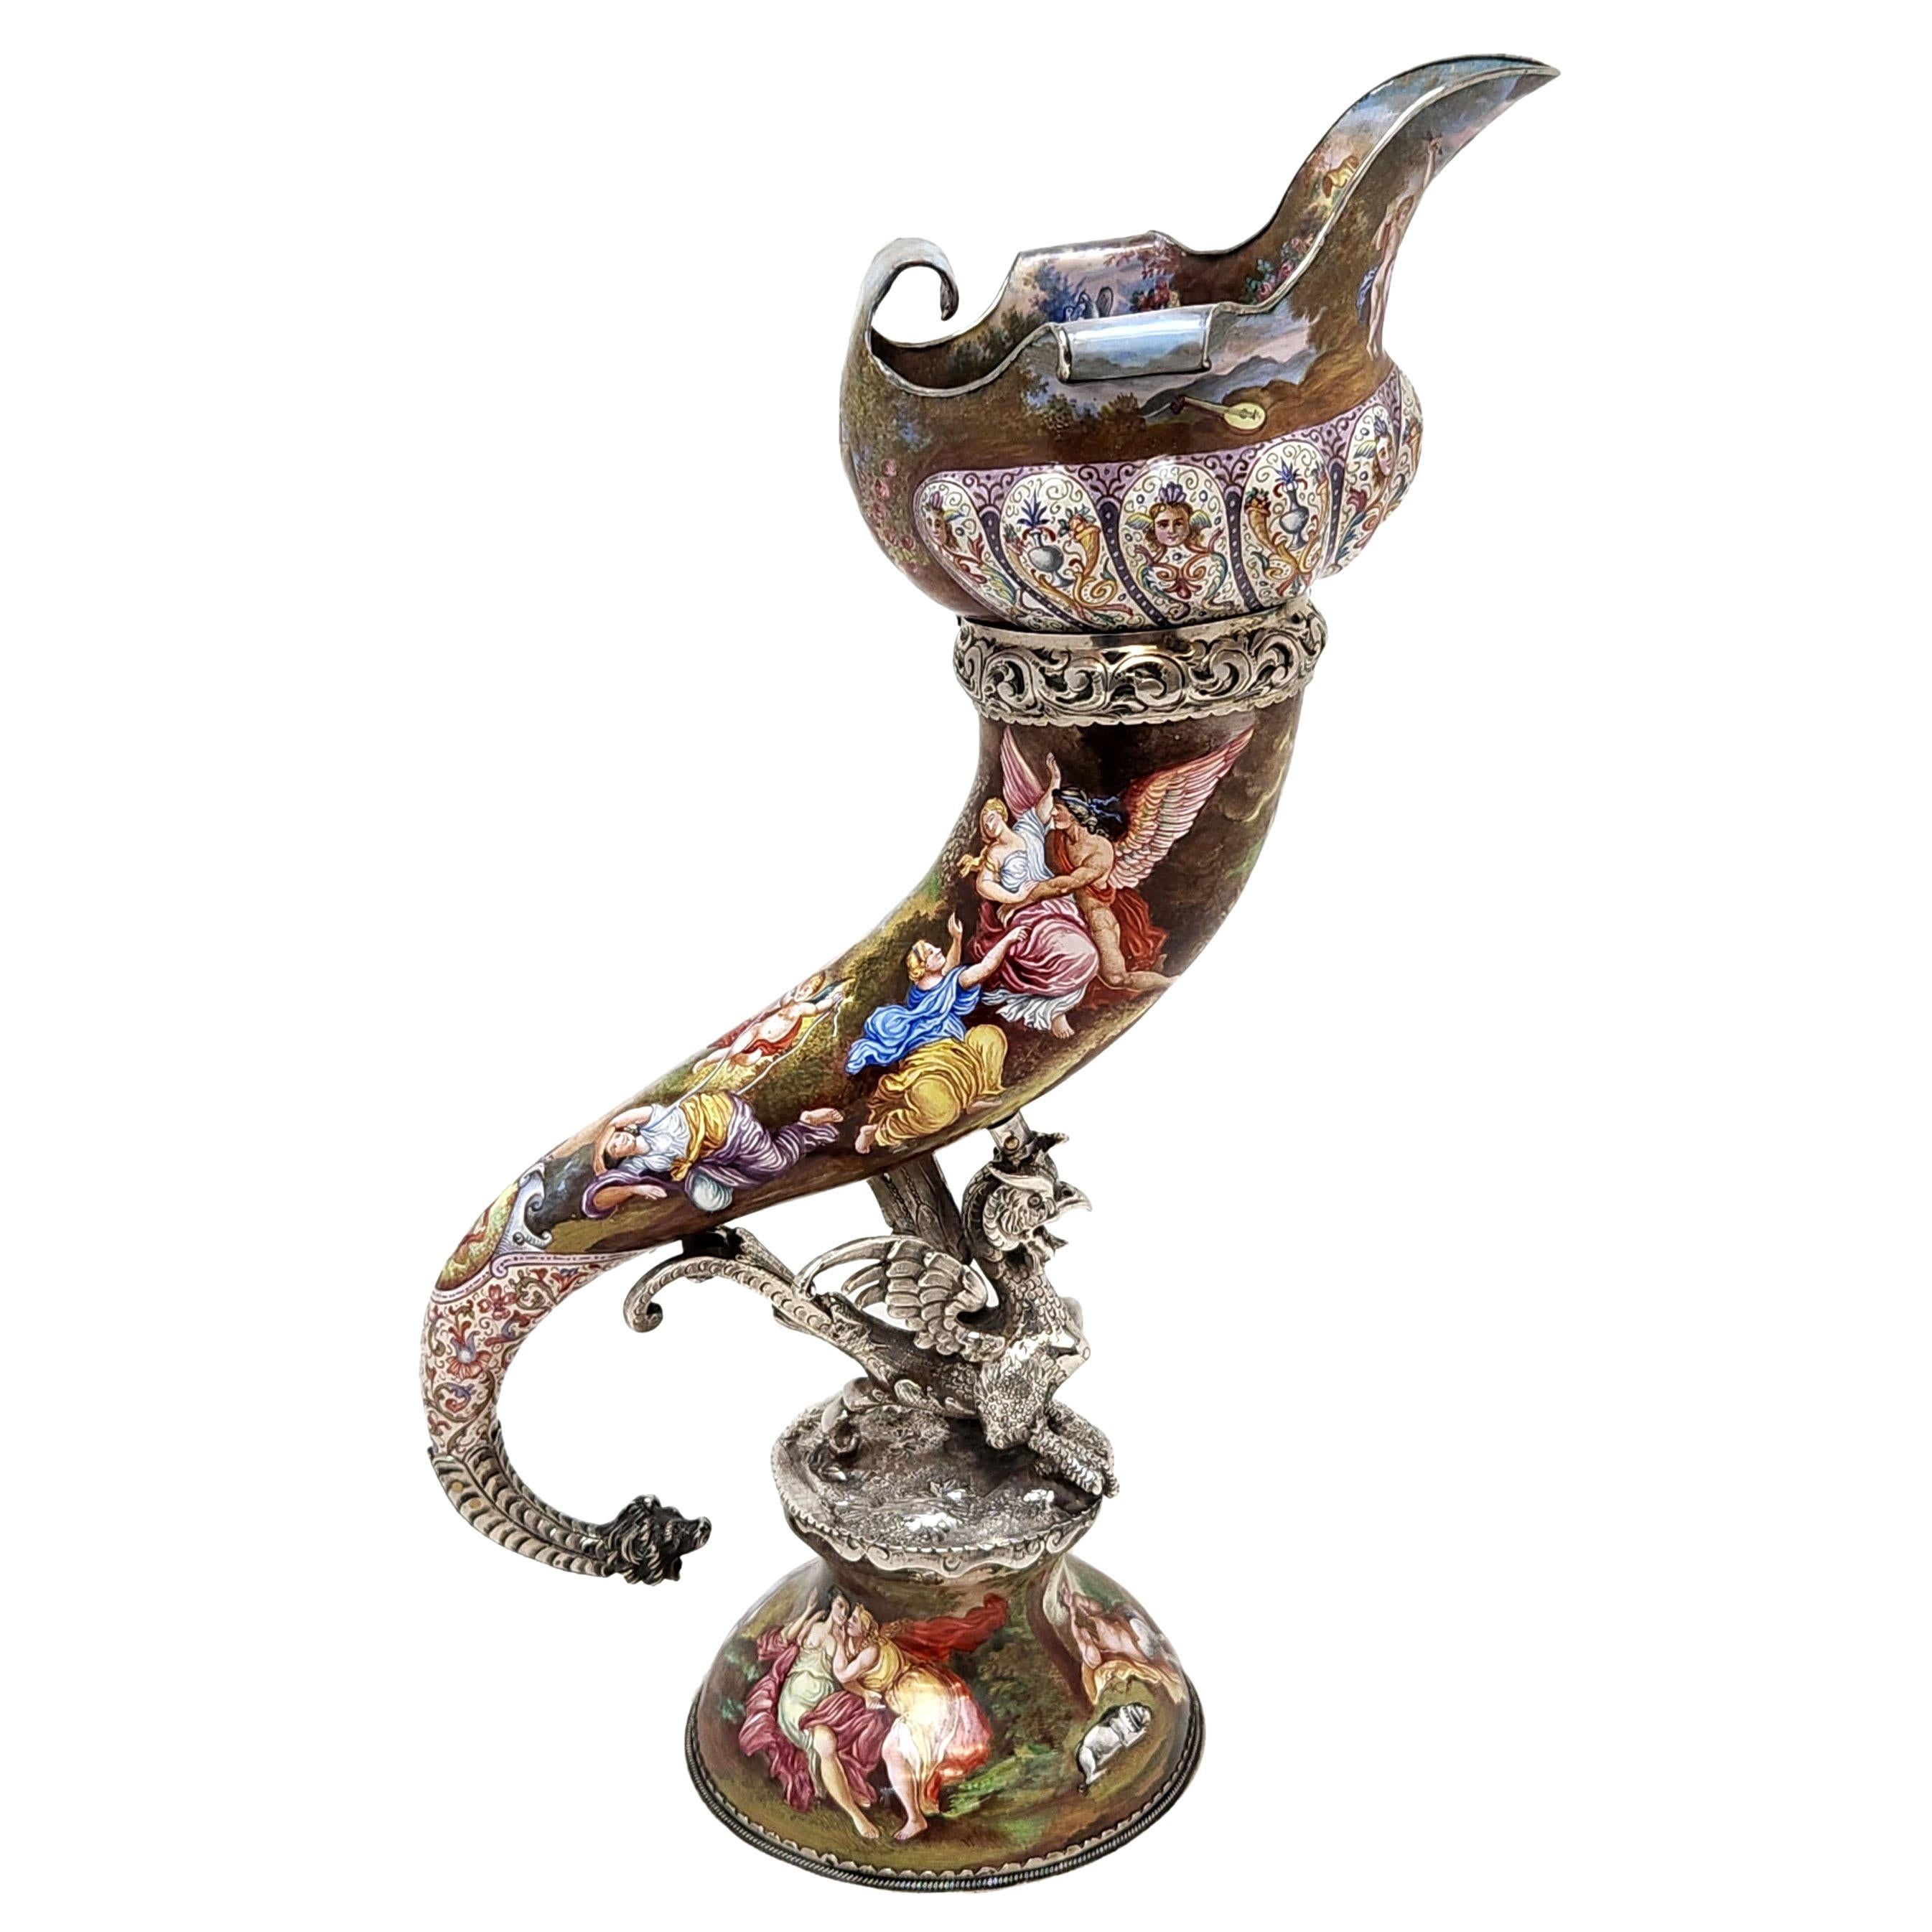 A magnificent Antique 19th century Silver & Viennese Enamel Vase in the shape of a large cornucopia supported by a silver griffin on a domed pedestal foot. The Cornucopia has a sumptuous flared and scrolled rim. The exterior of the cornucopia and